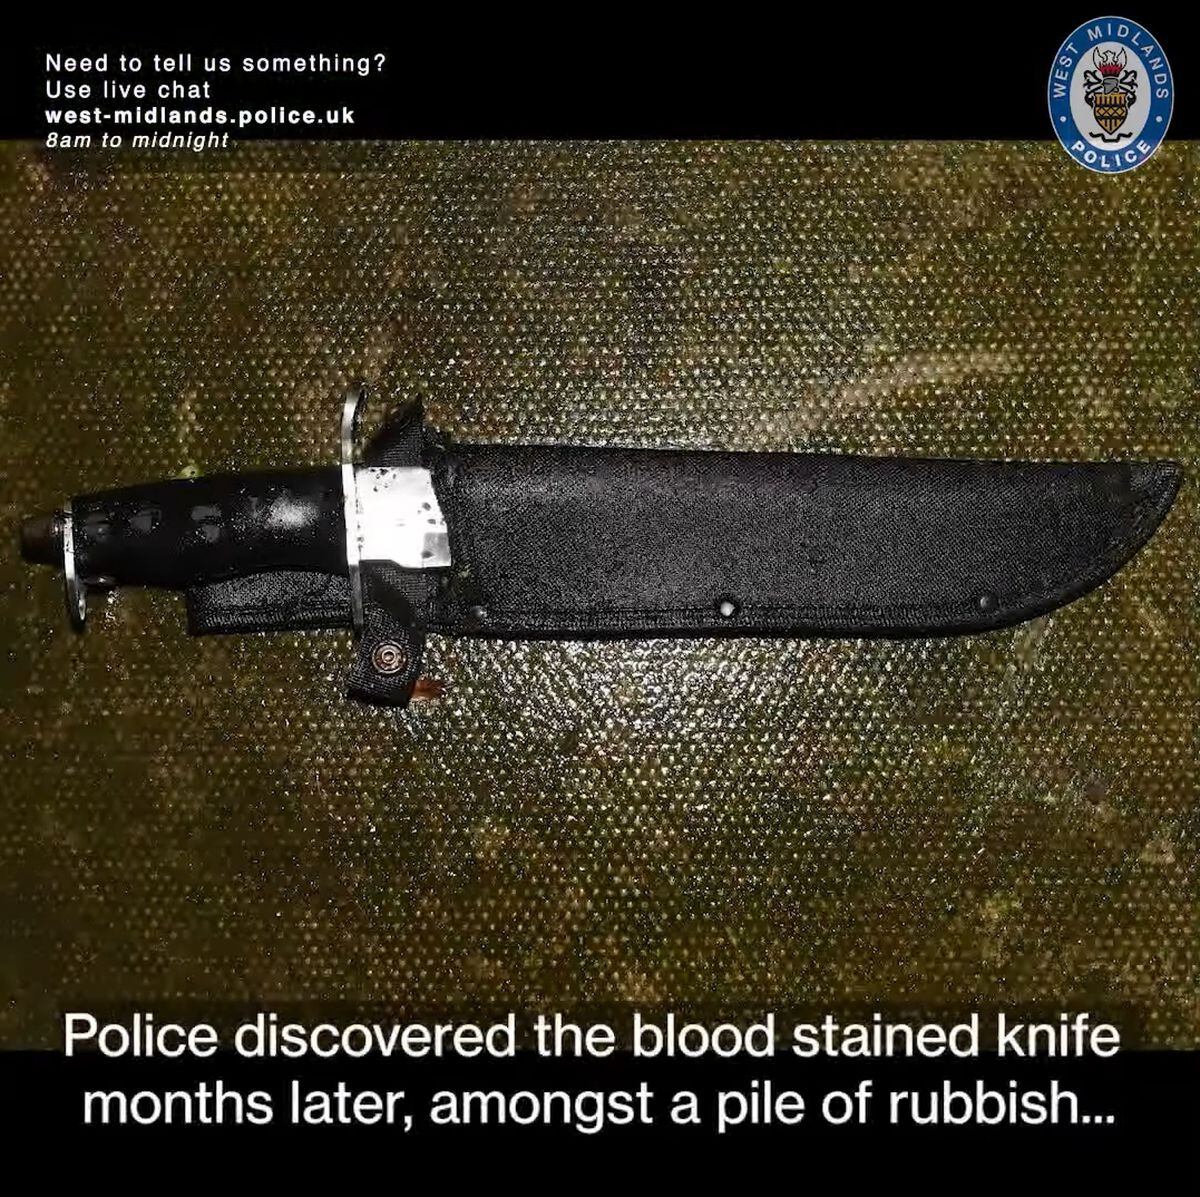 The knife was found between a fence and a wall after police scoured CCTV footage